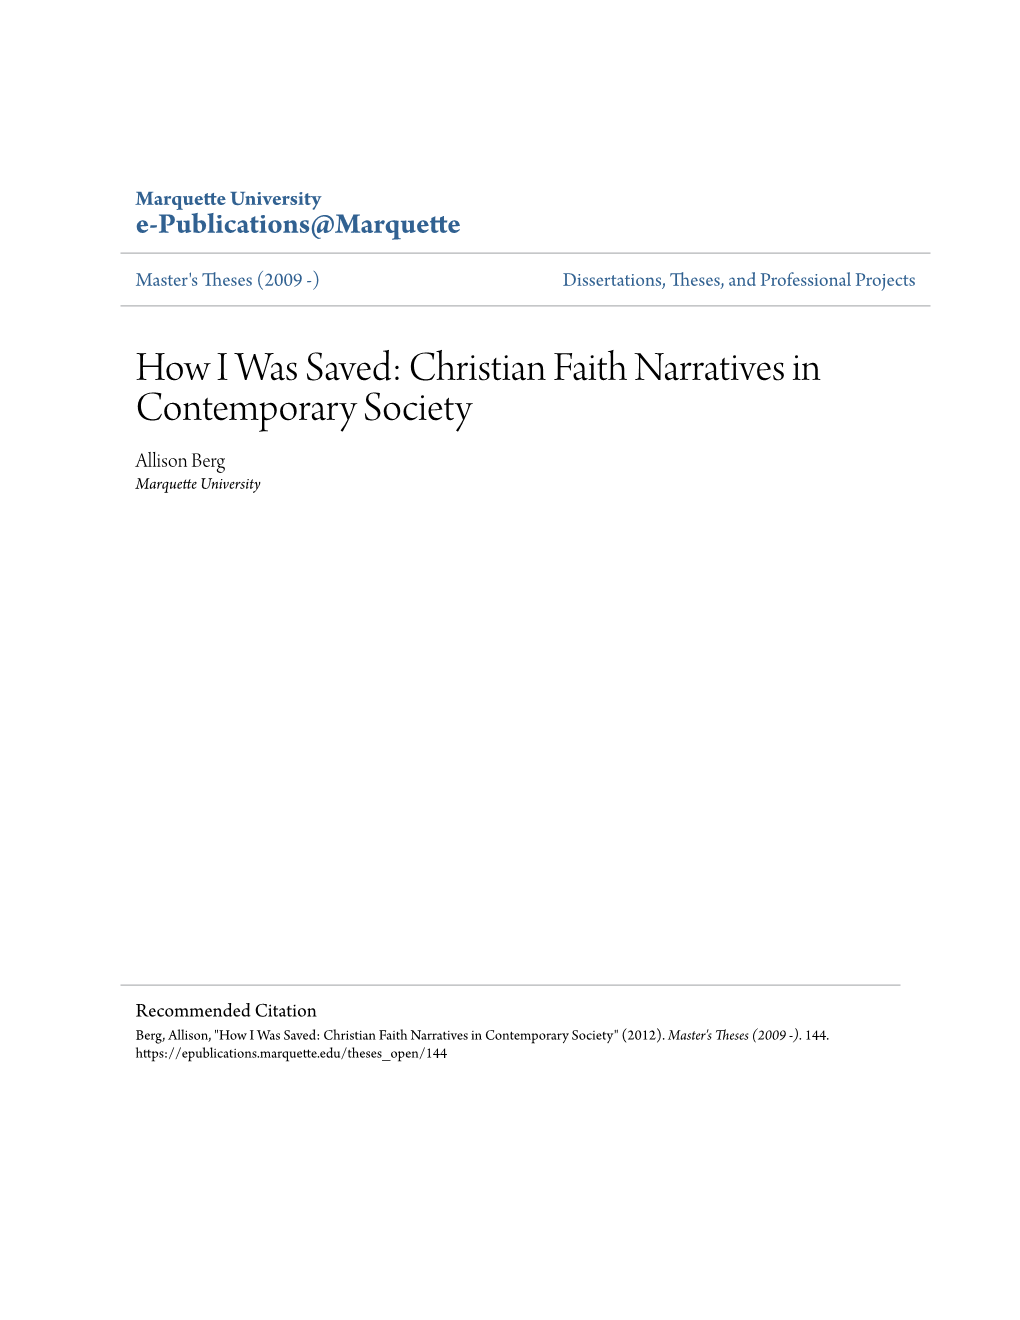 How I Was Saved: Christian Faith Narratives in Contemporary Society Allison Berg Marquette University